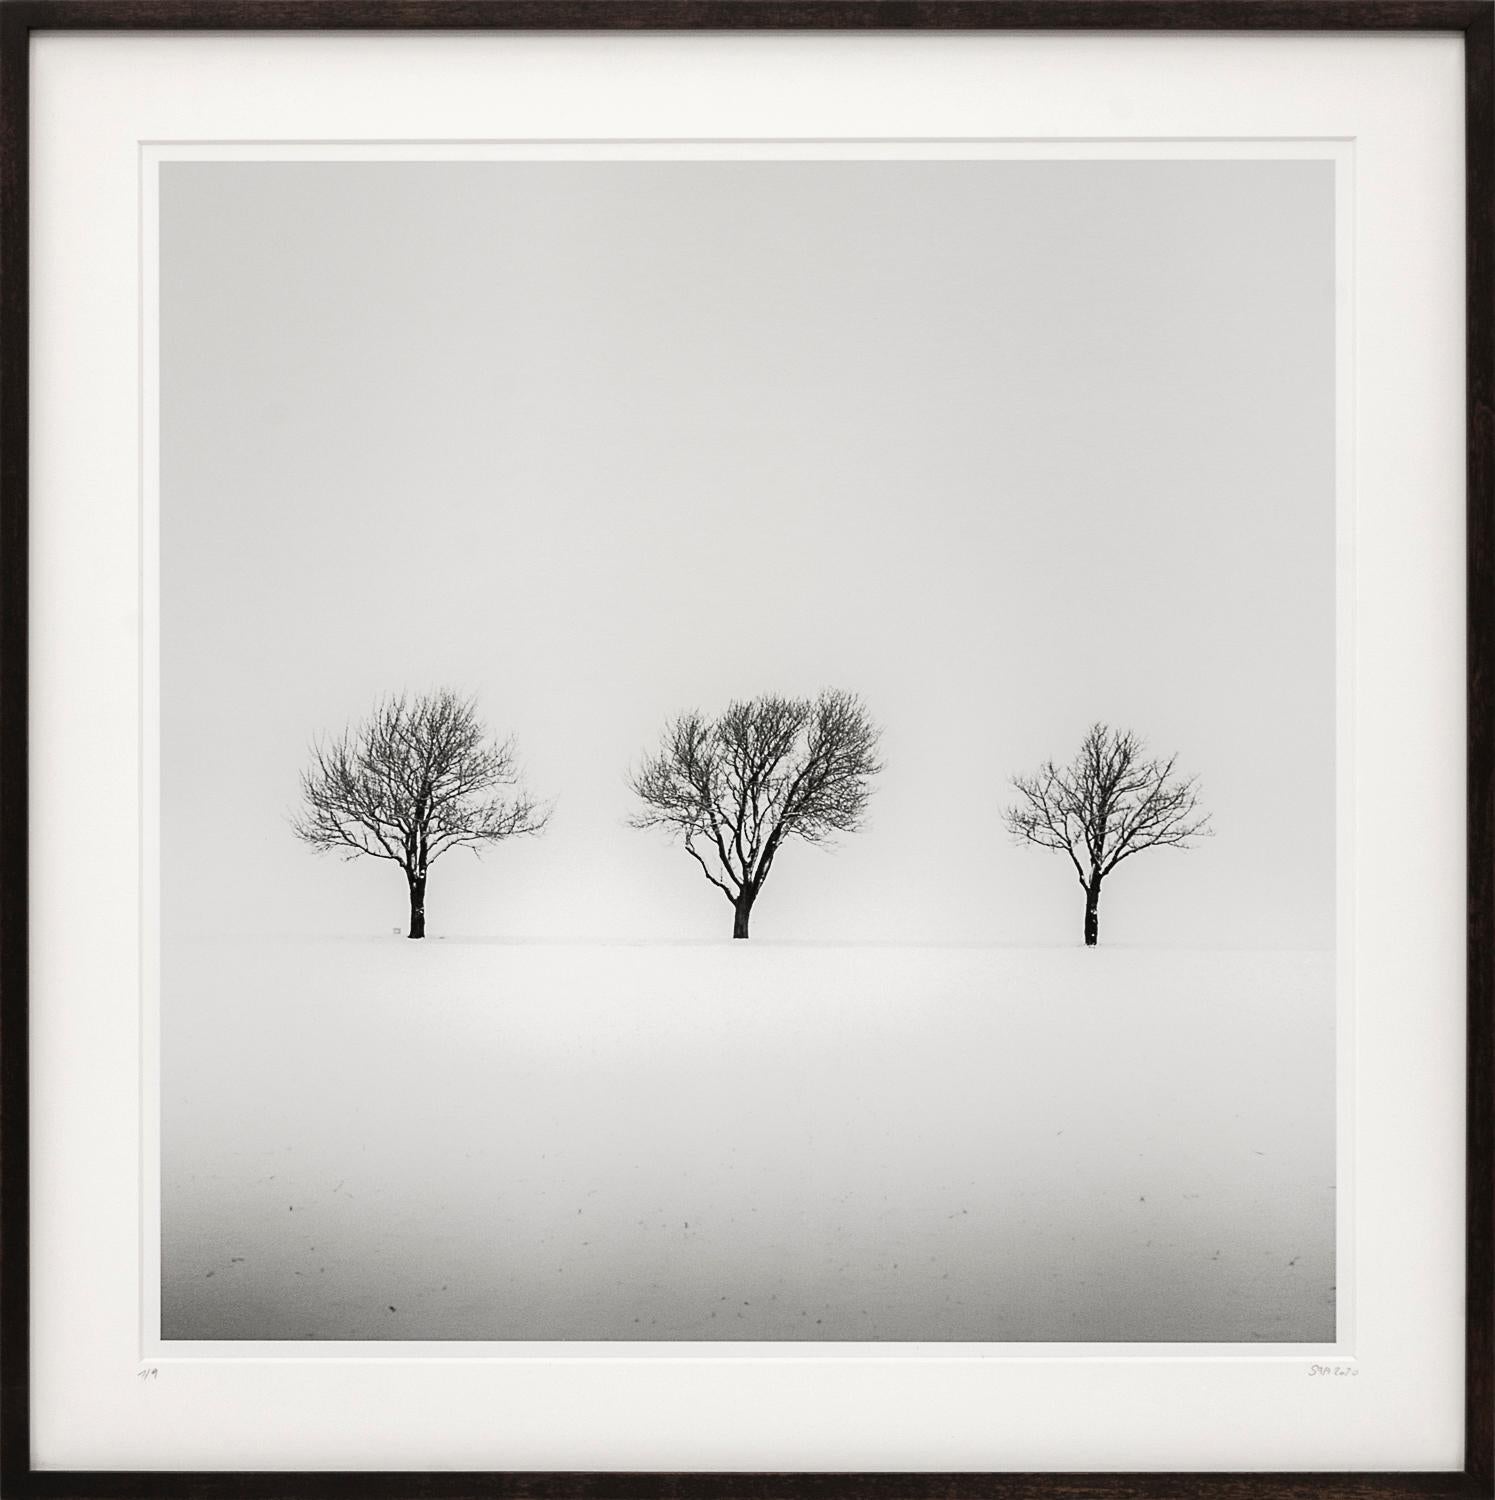 Gerald Berghammer Black and White Photograph - Trees in snowy Field, black and white gelatin silver fineart photography, framed